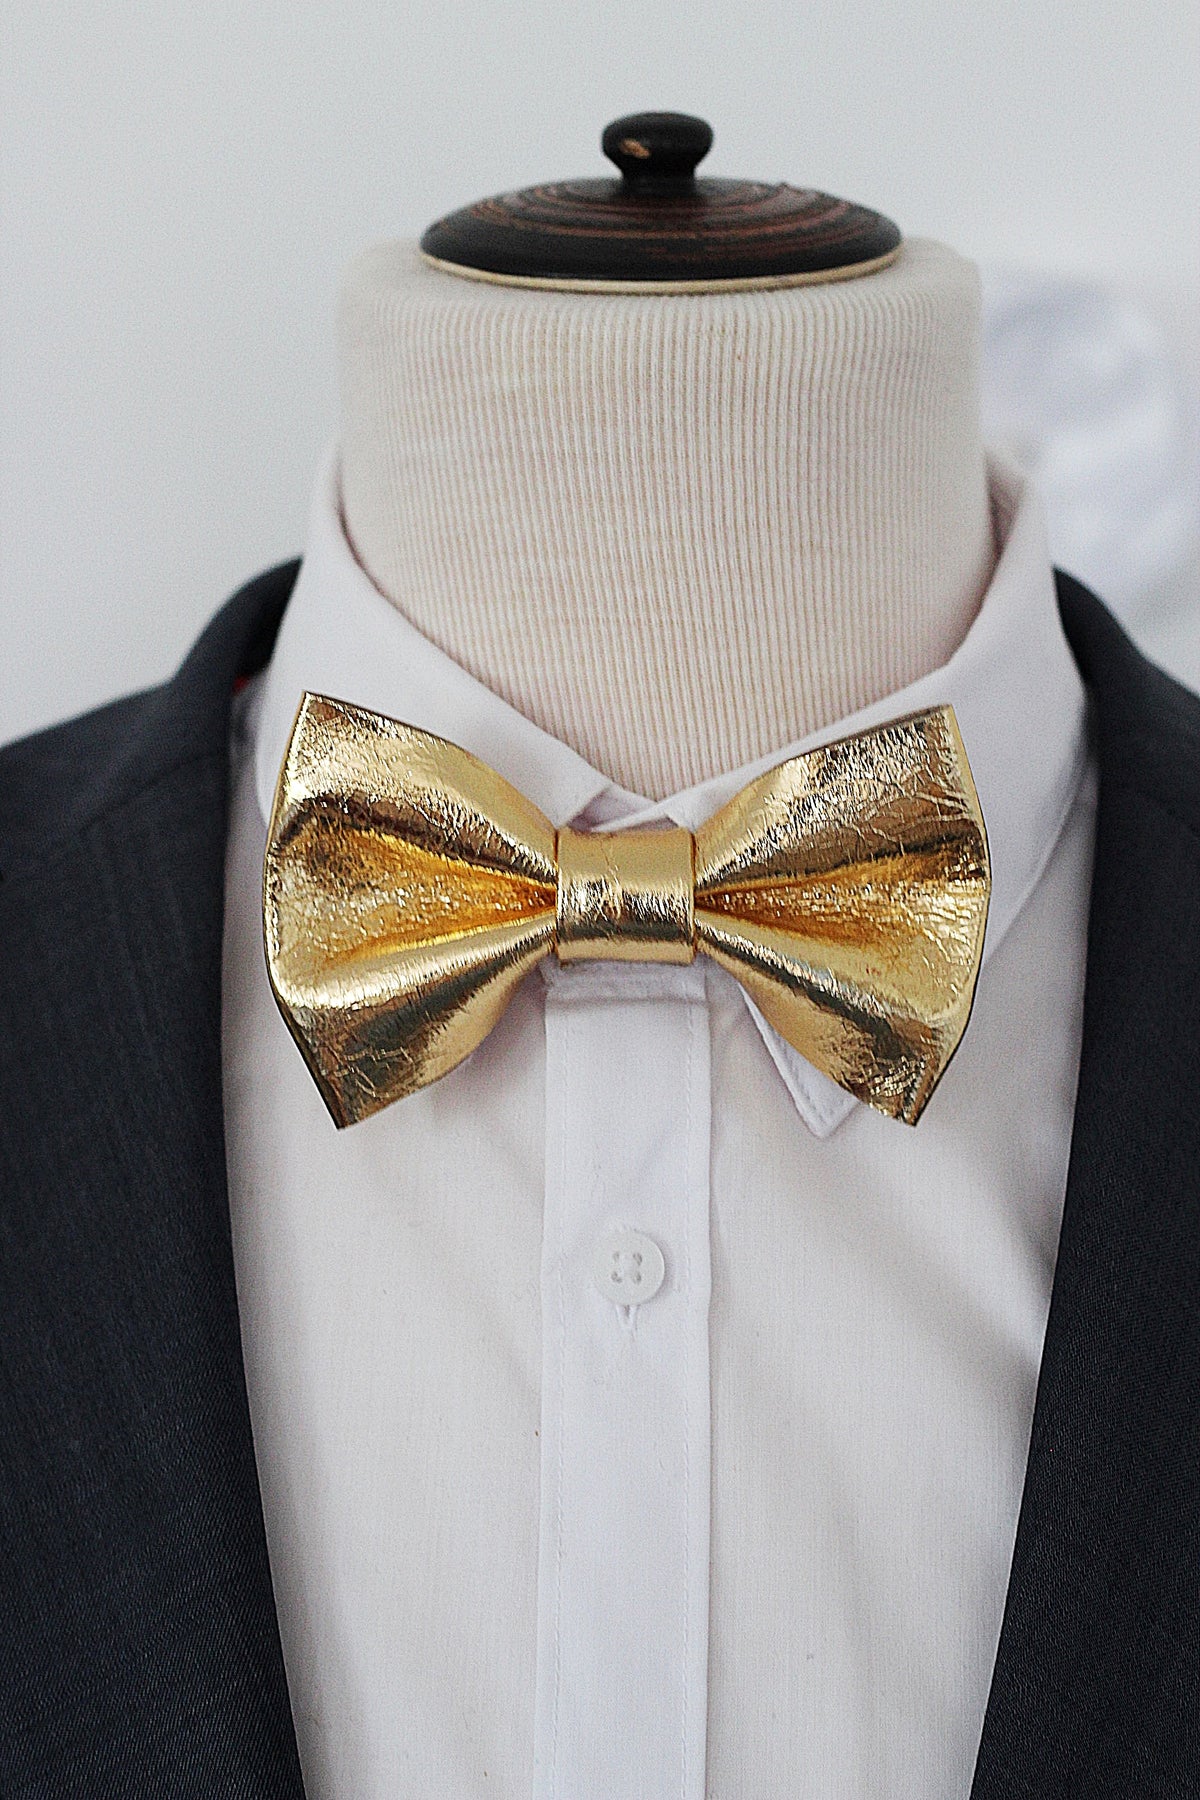 Gold metallic bow tie, gold wedding bowtie, mens bold bow tie, gold bow tie and suspender set, groomsmen gold bow tie, gold prom boys suit